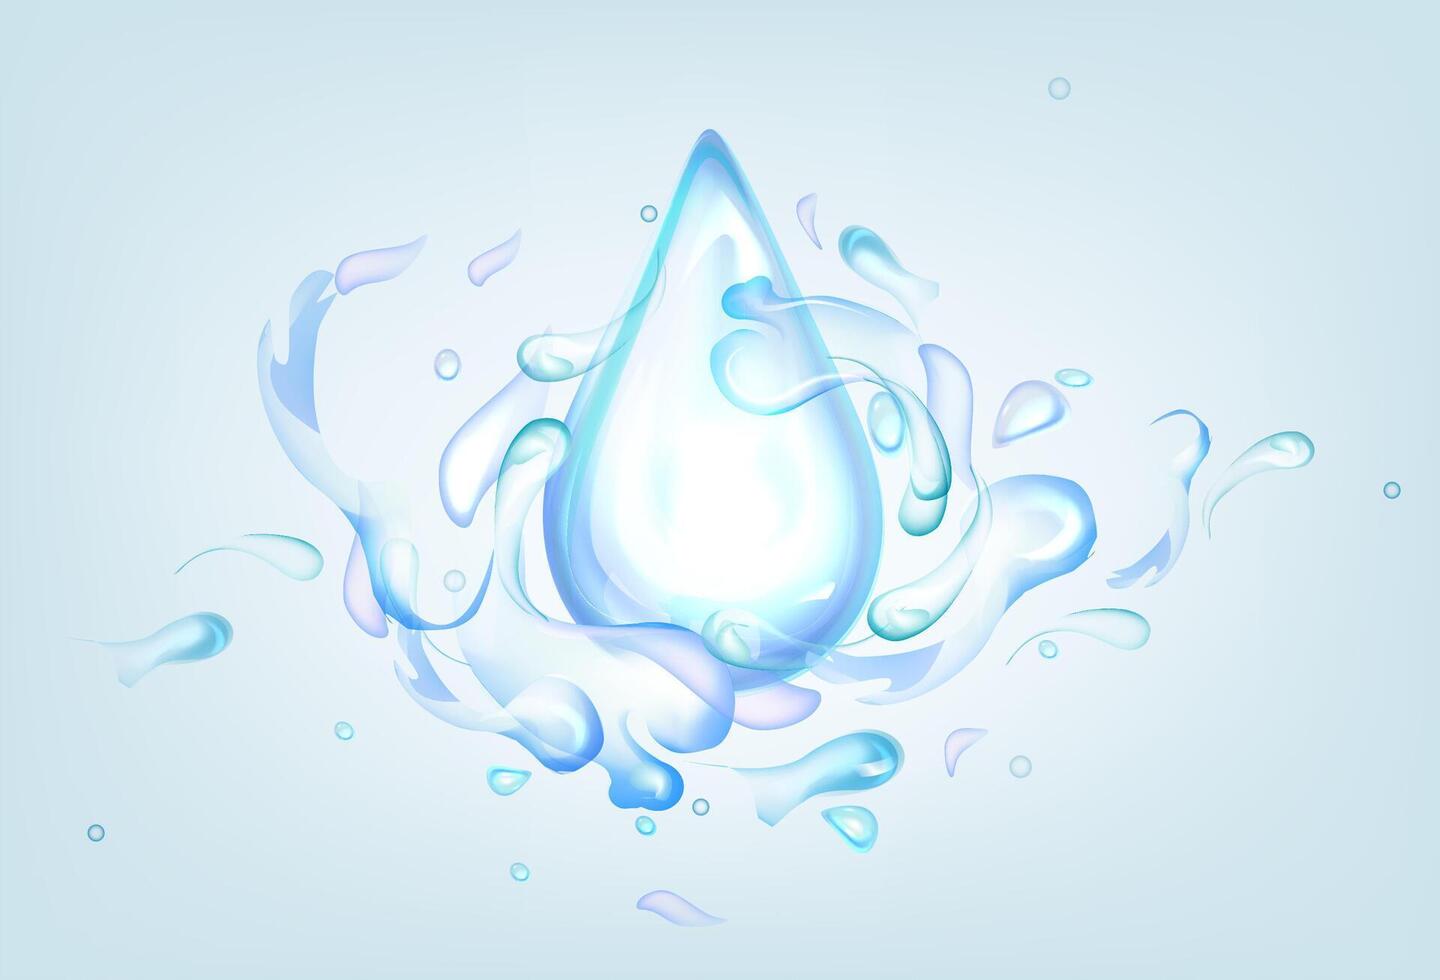 Blue drop with water splashes. Realistic 3d vector Illustration of fluid splashing isolated on light background. Liquid waves with swirls, clear pure aqua element with spray droplets. Hydration ad